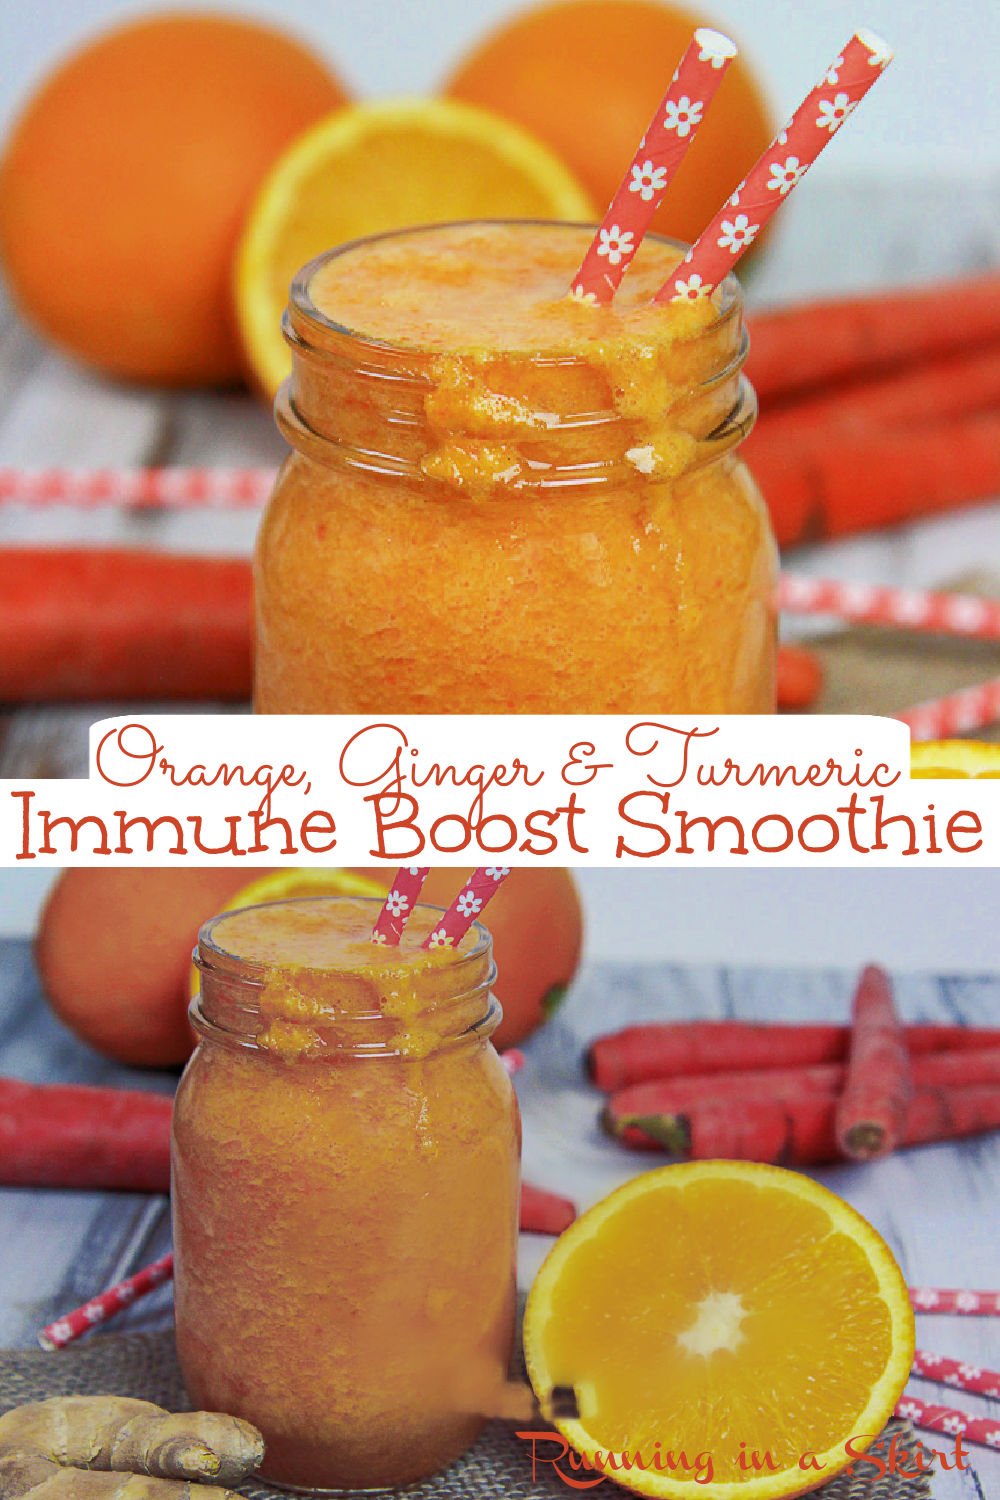 Immune Boosting & Anti Inflammatory Orange, Ginger & Turmeric Smoothie recipe. Great for a natural detox for the immune system and for inflammation. A dairy free, healthy smoothie with orange, ginger, turmeric, carrot and a touch of pineapple for natural sweetness. Eat for breakfast or a snack. Vegan, vegetarian & gluten free. / Running in a Skirt via @juliewunder